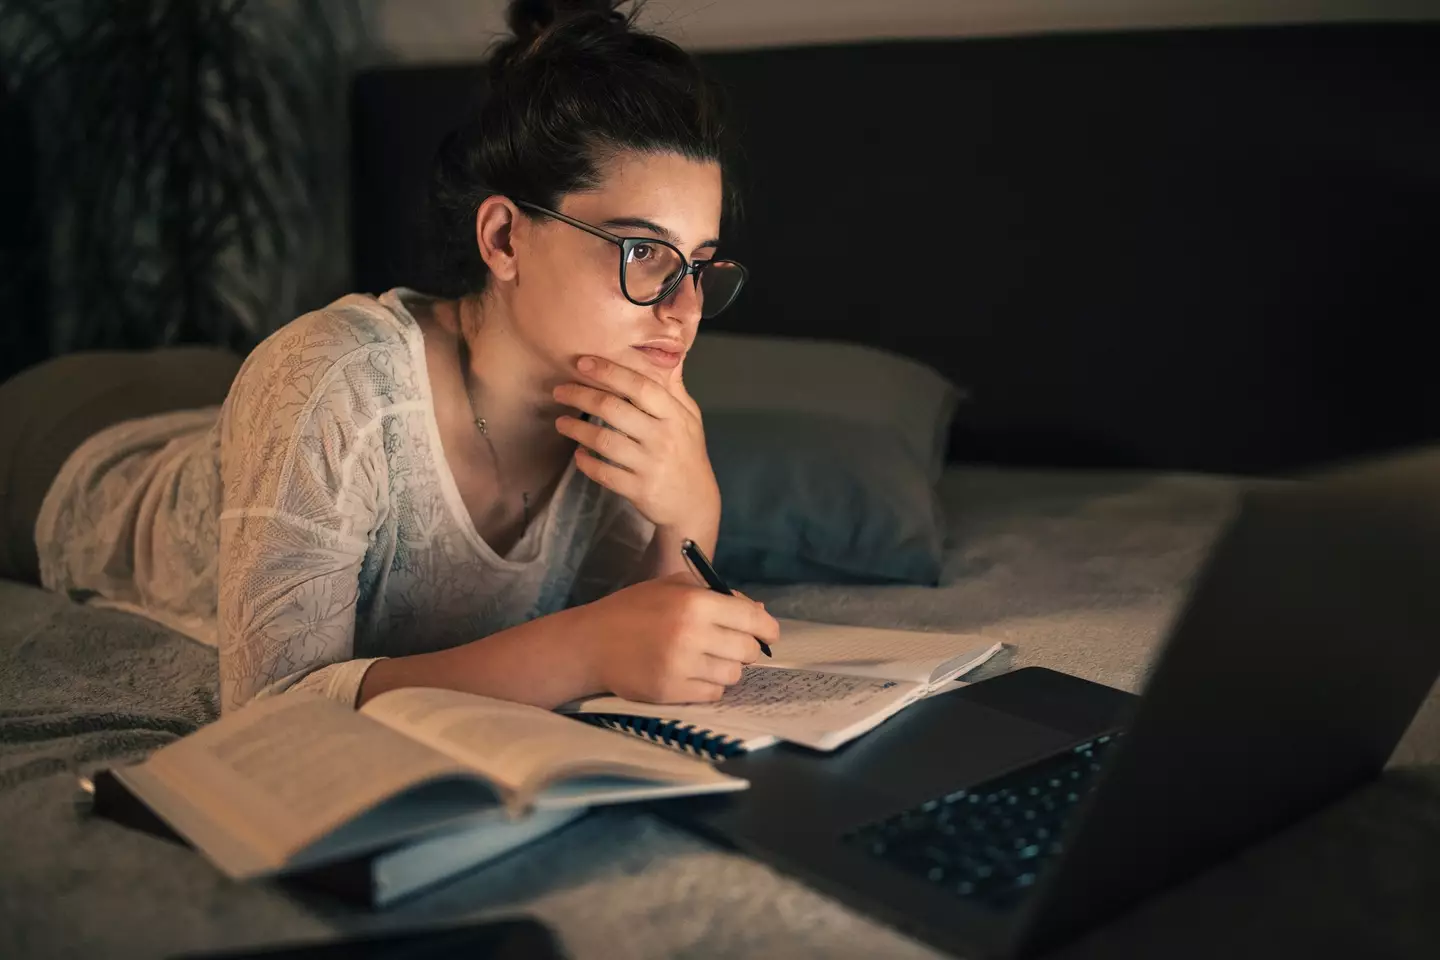 Staying up all night to study isn't great for your body.